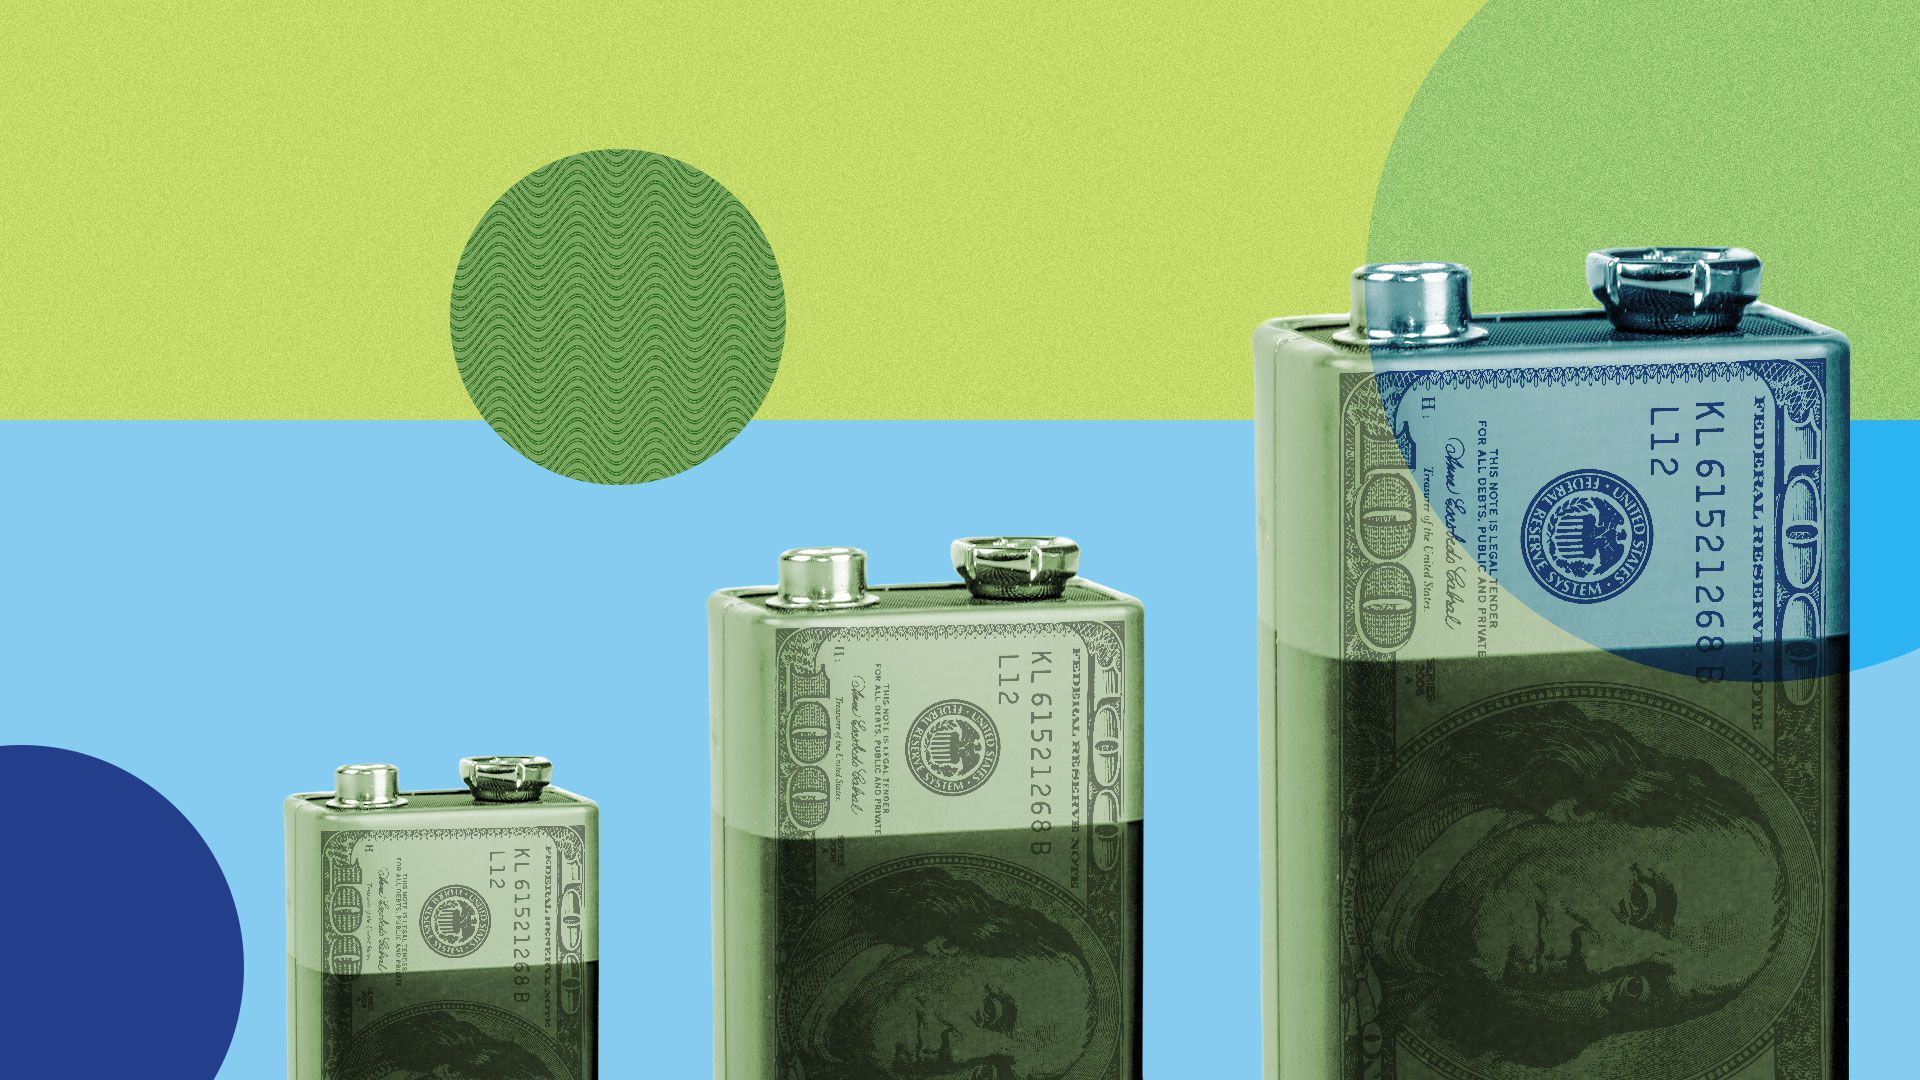 Illustration of three batteries increasing in size overlaid with money and surrounded by abstract shapes.